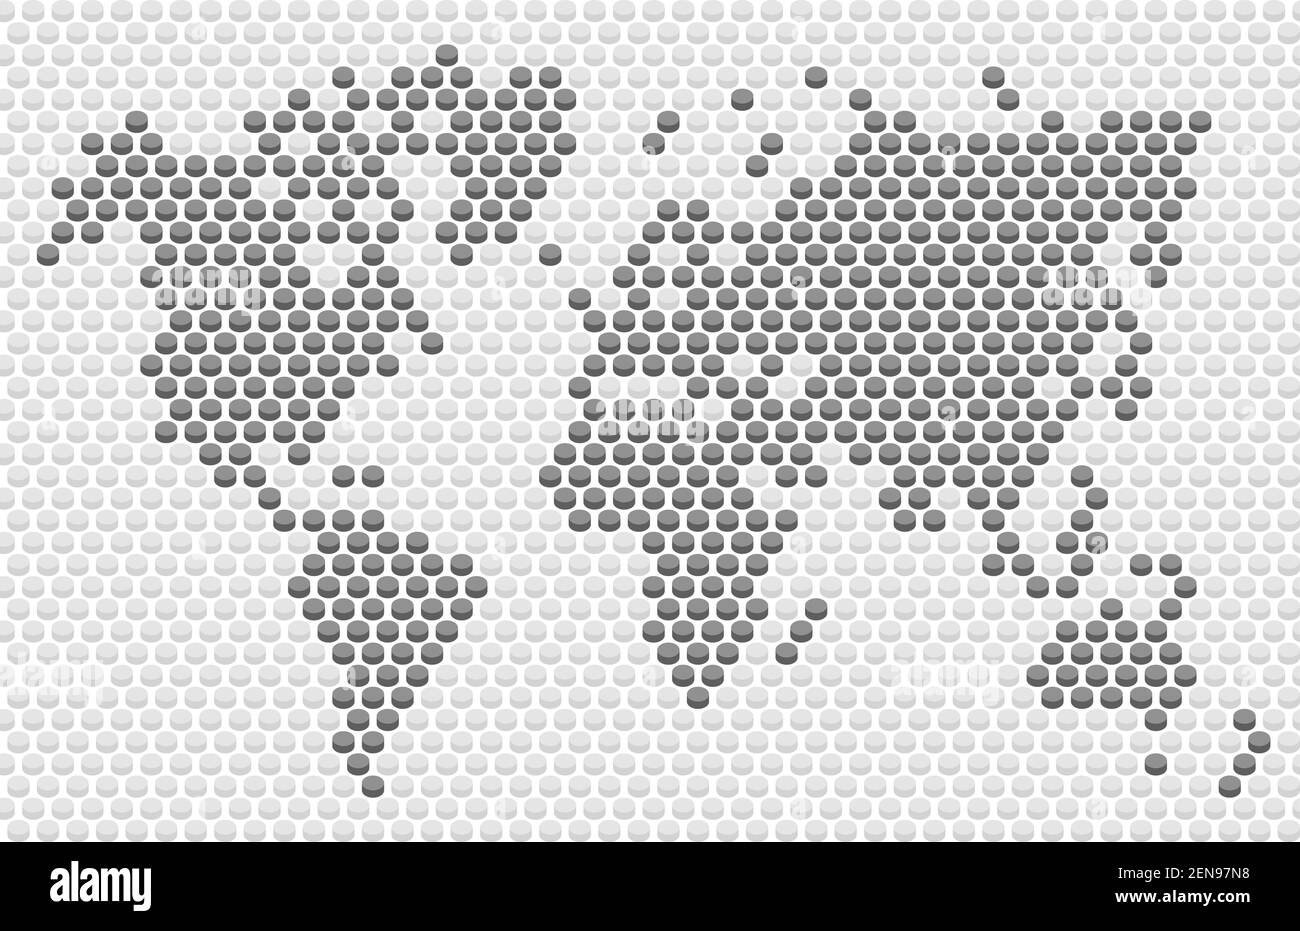 perspective flat button of dotted world map,grayscale full frame pattern,vector and illustration Stock Vector